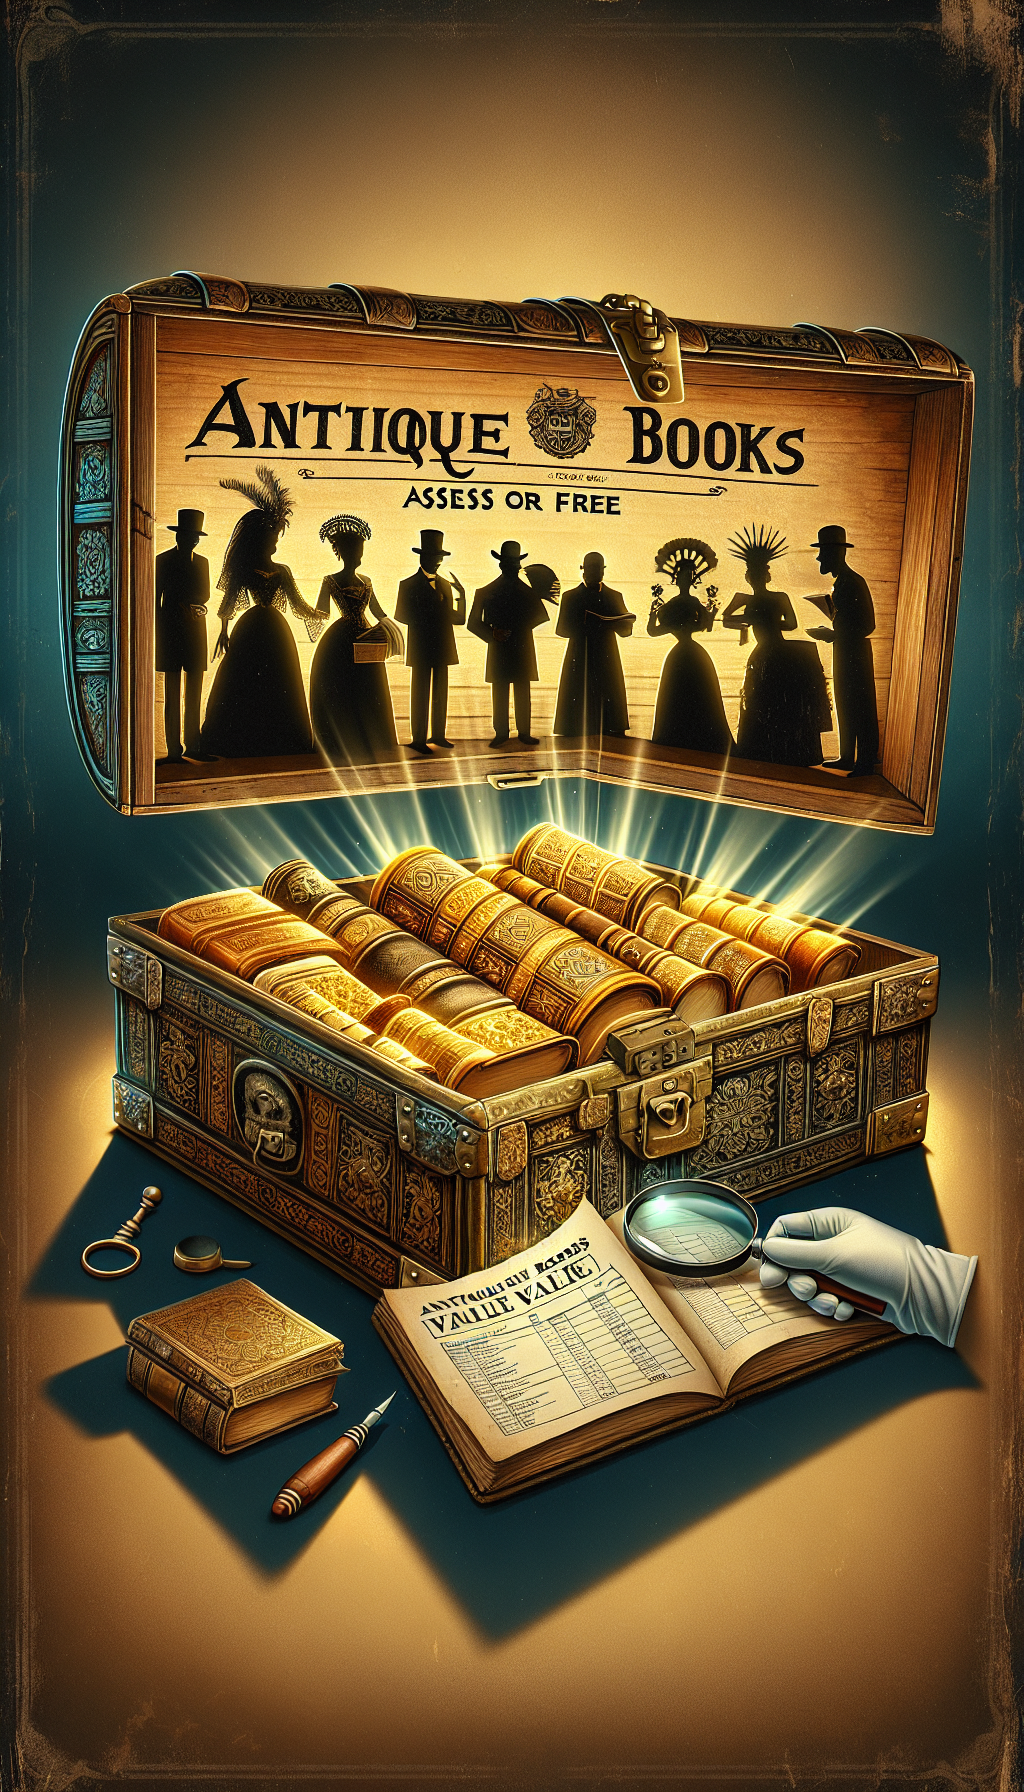 An illustration displays an open, ornate treasure chest filled with luminous, golden antique books, their pages slightly ajar as to reveal a magnifying glass, white gloves, and a preservation checklist. The chest is adorned with a vintage label saying "Antique Books Value: Assess for Free." Shadowed figures of people from various historical periods peer curiously over the chest's edge.